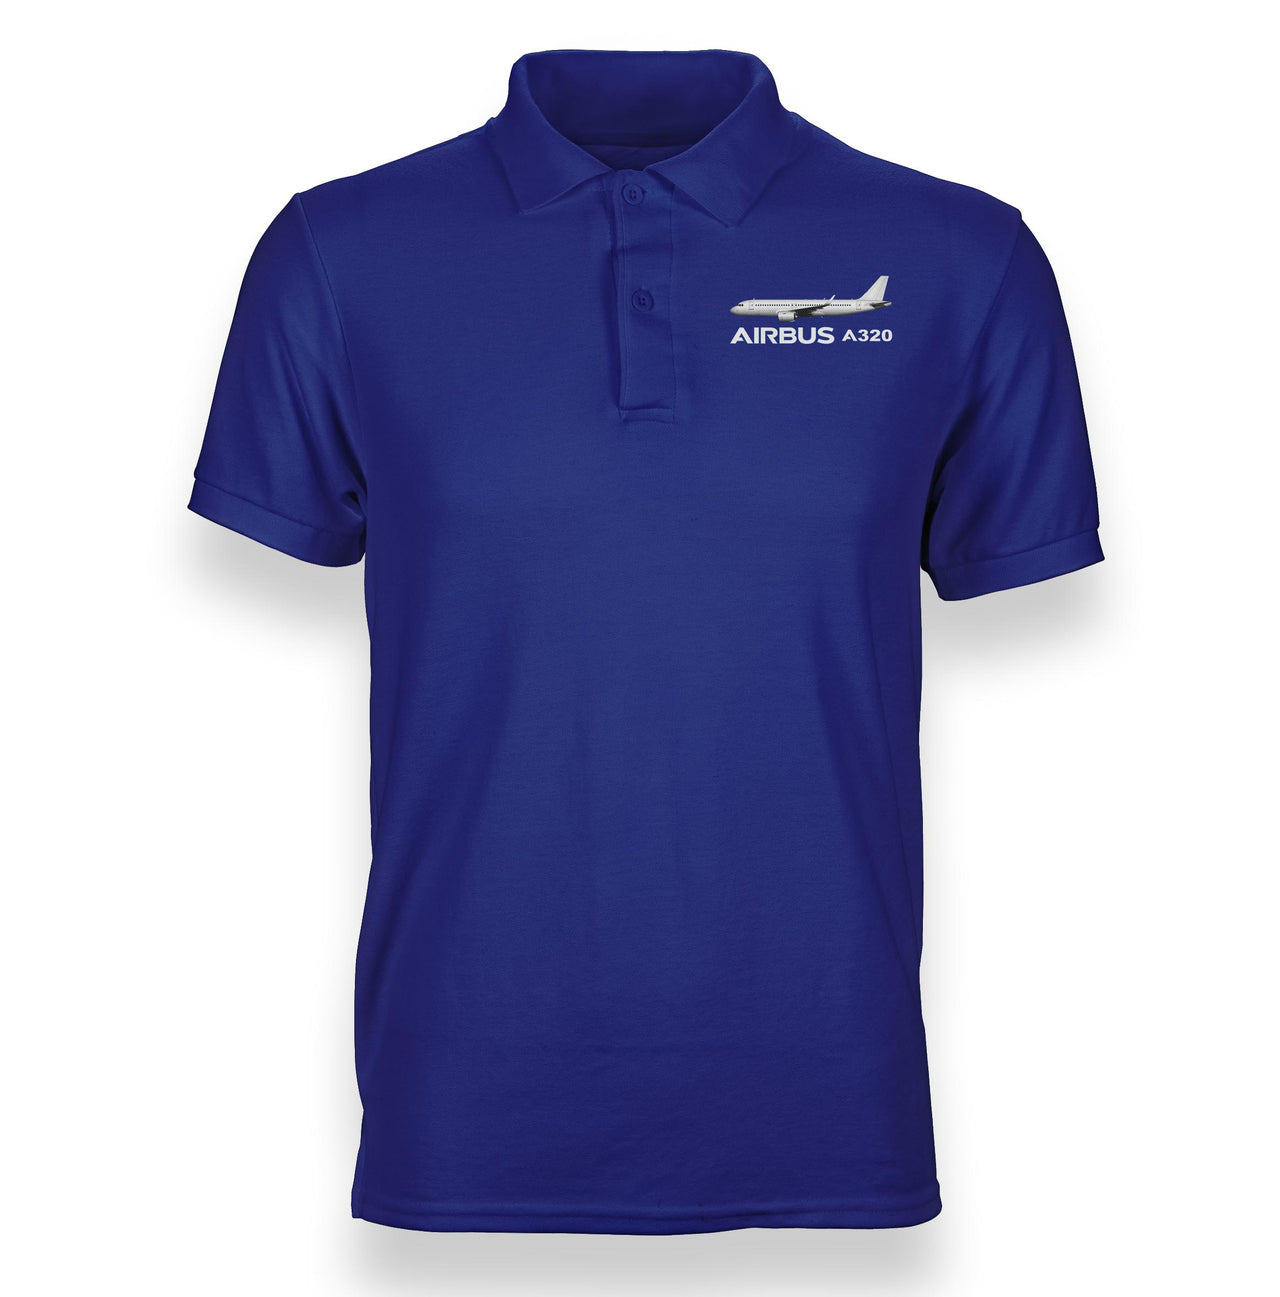 The Airbus A320 Designed Polo T-Shirts